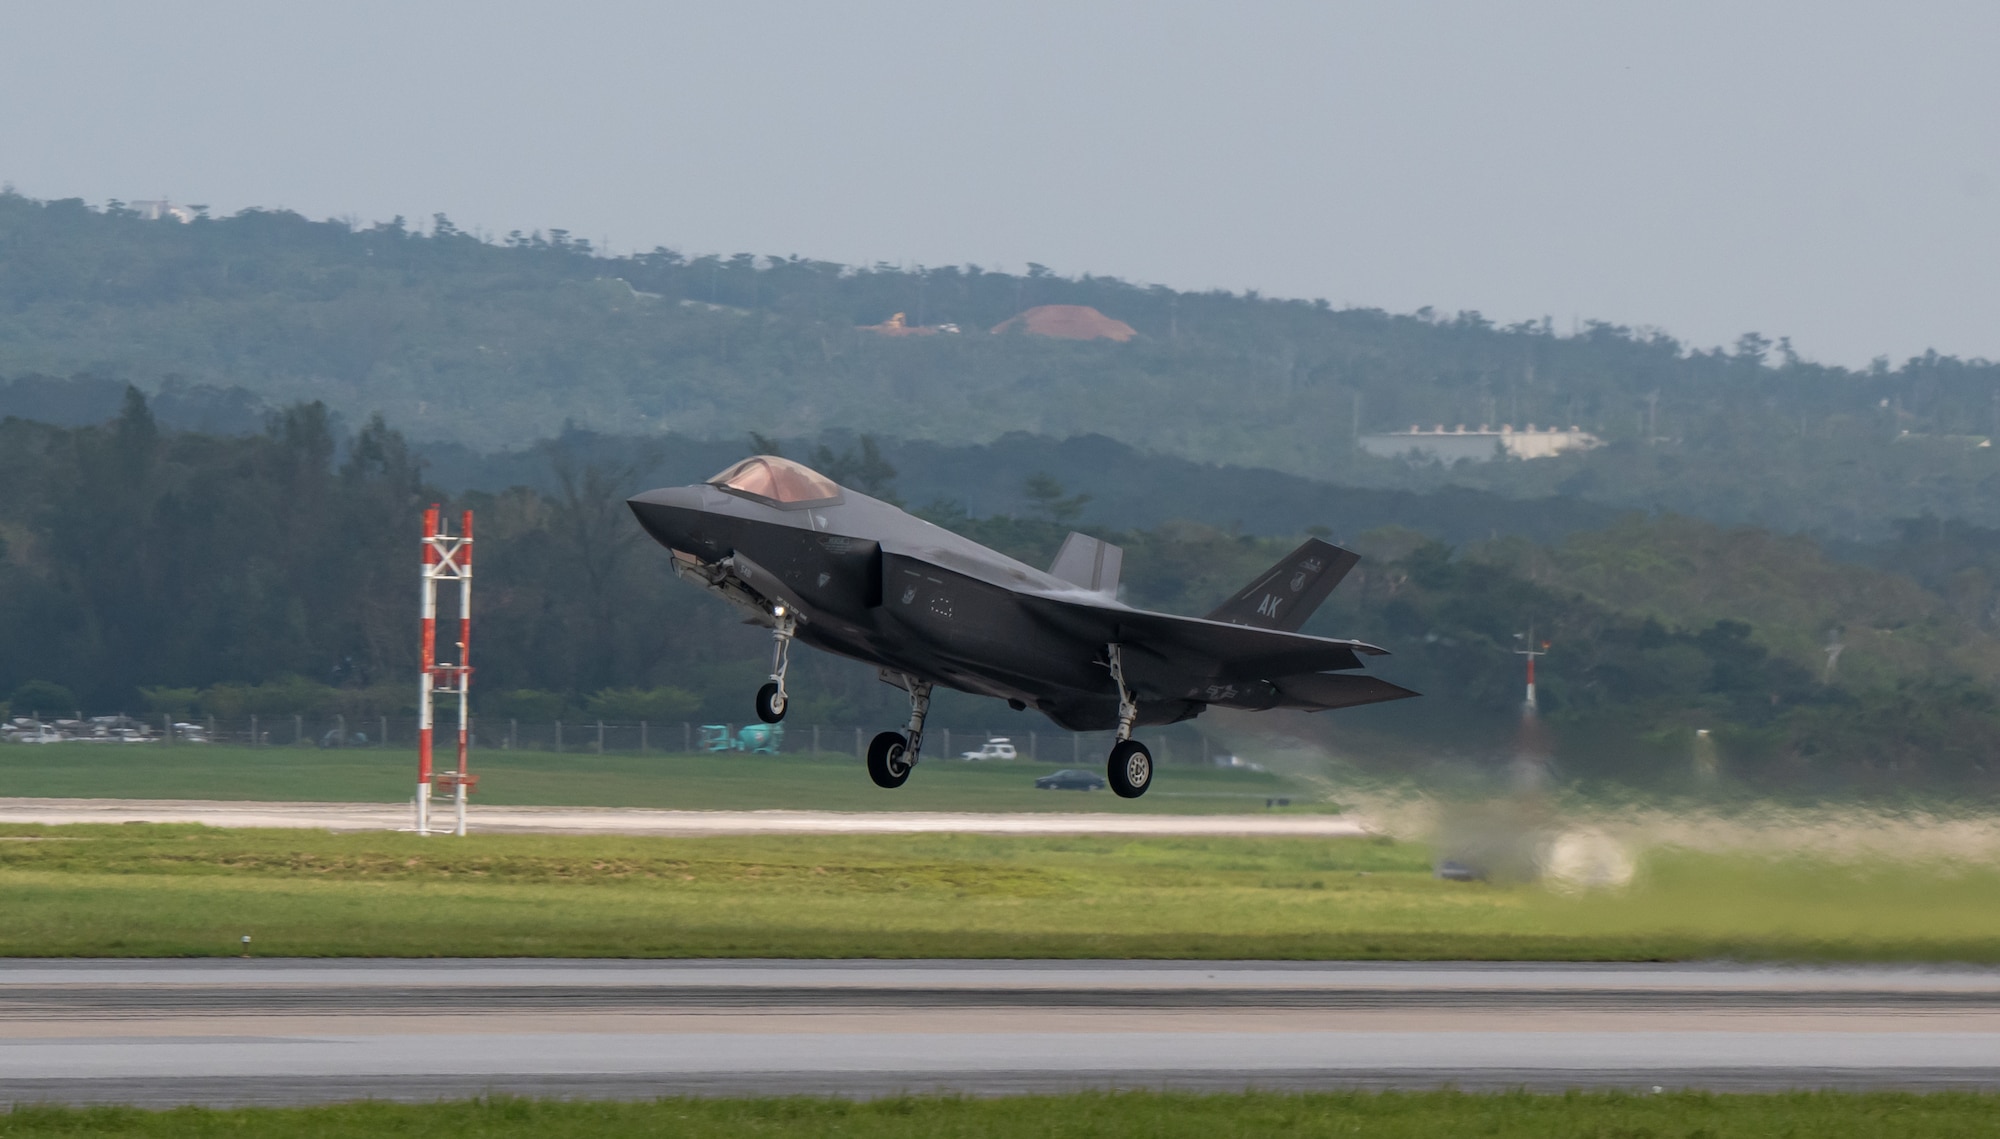 An F-35A Lightning II takes-off on a runway.